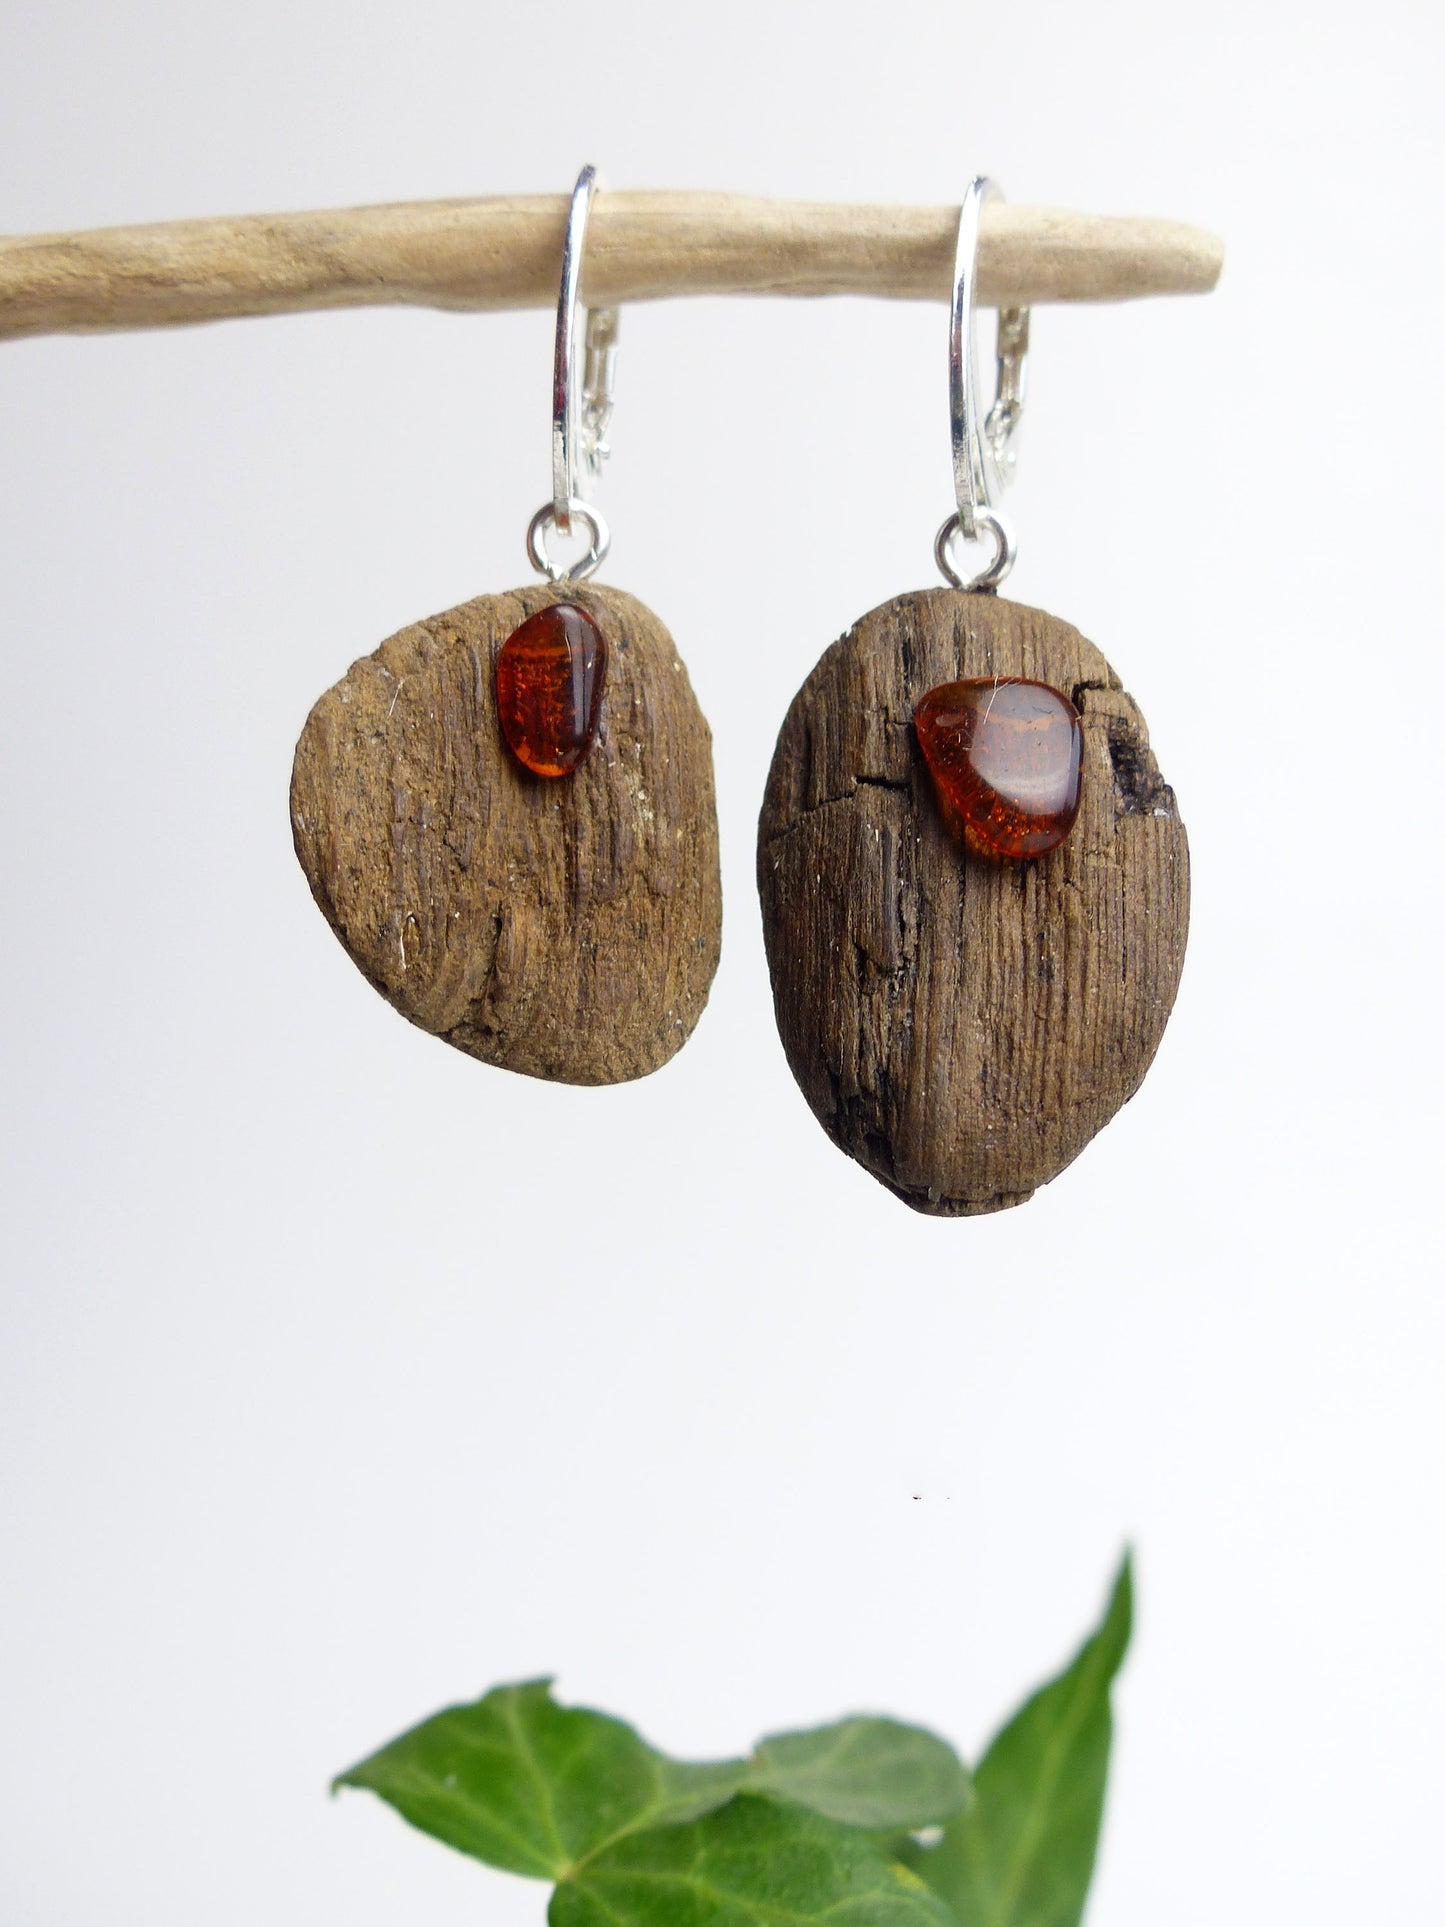 Driftwood Earrings SUURI with Amber and 925 Silver, handmade eco friendly gift